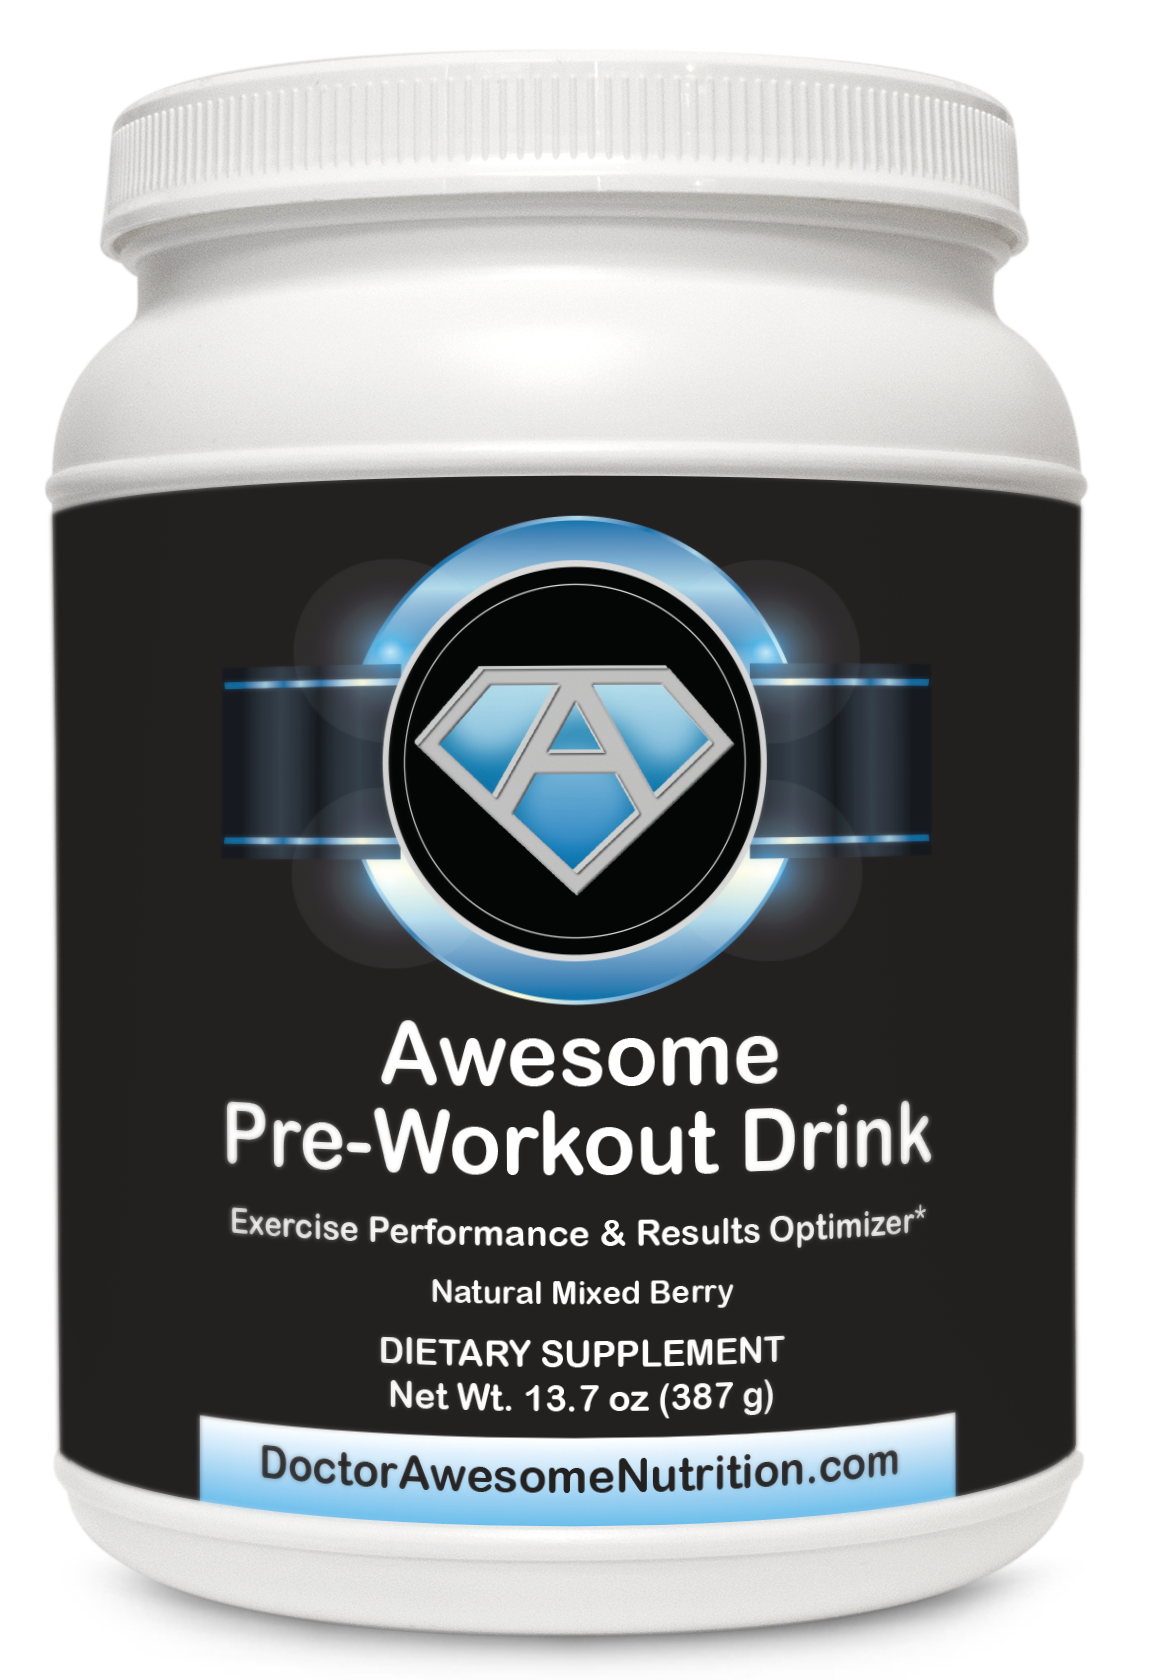 Awesome Pre-Workout Drink